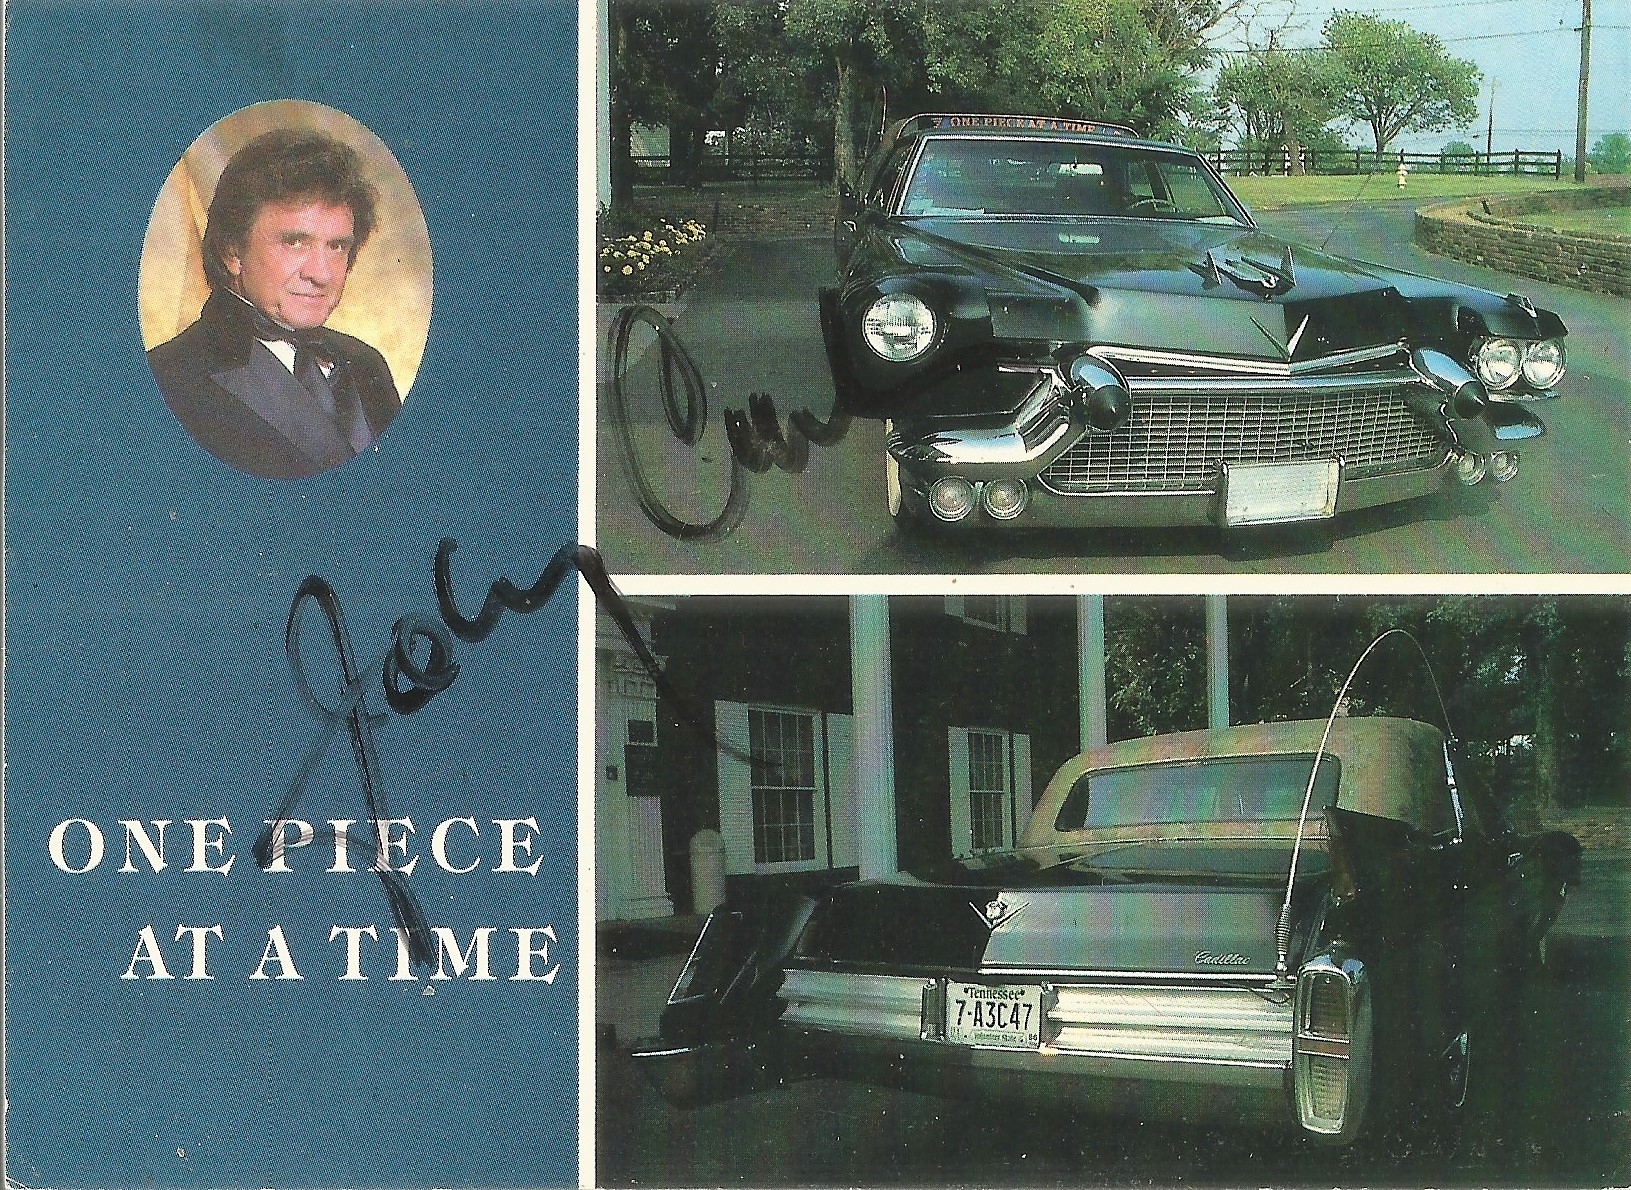 Johnny Cash signed 6x4 colour postcard. February 26, 1932 - September 12, 2003, was an American